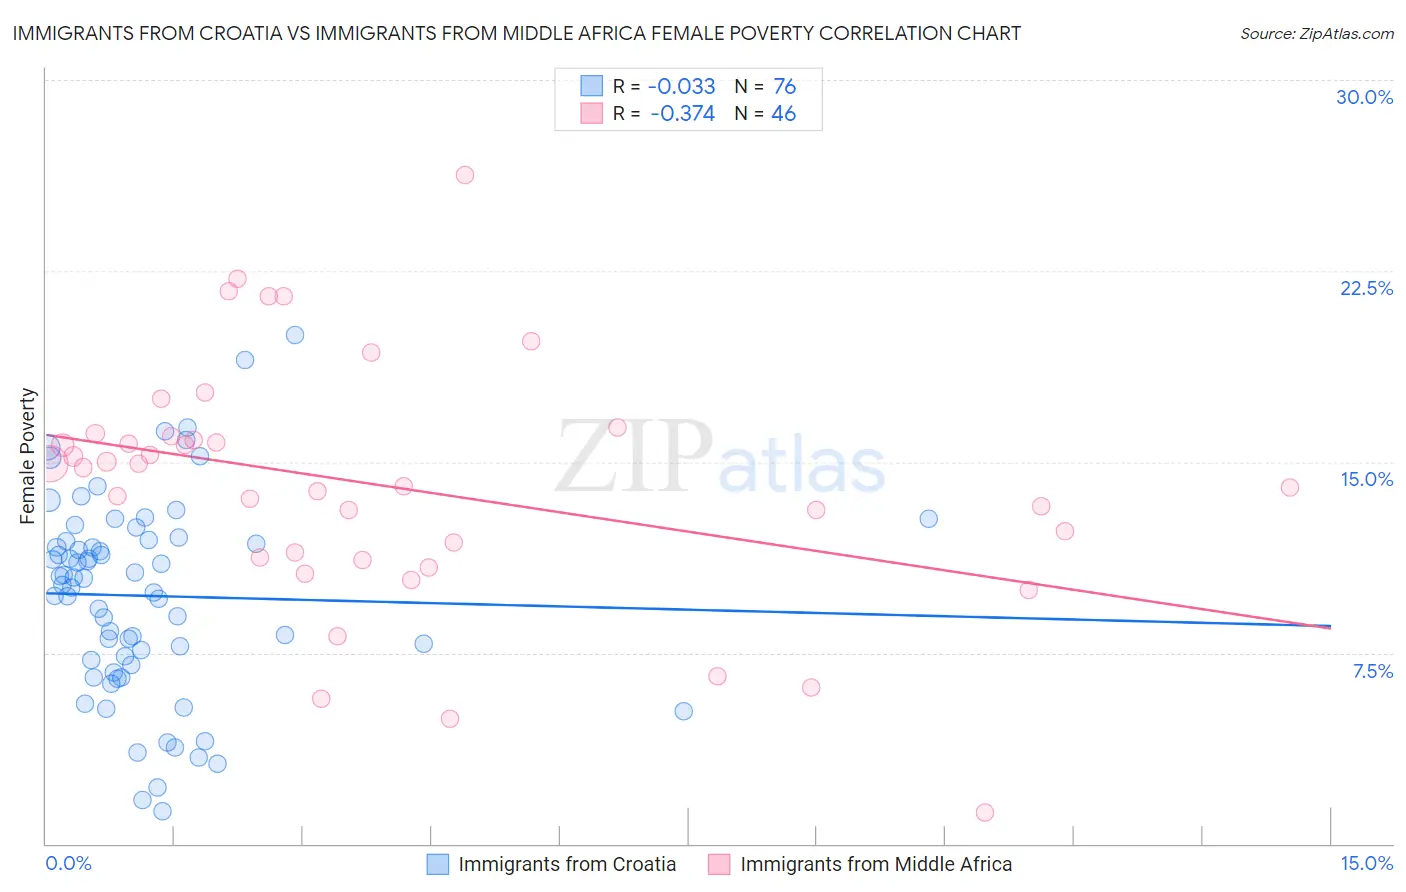 Immigrants from Croatia vs Immigrants from Middle Africa Female Poverty